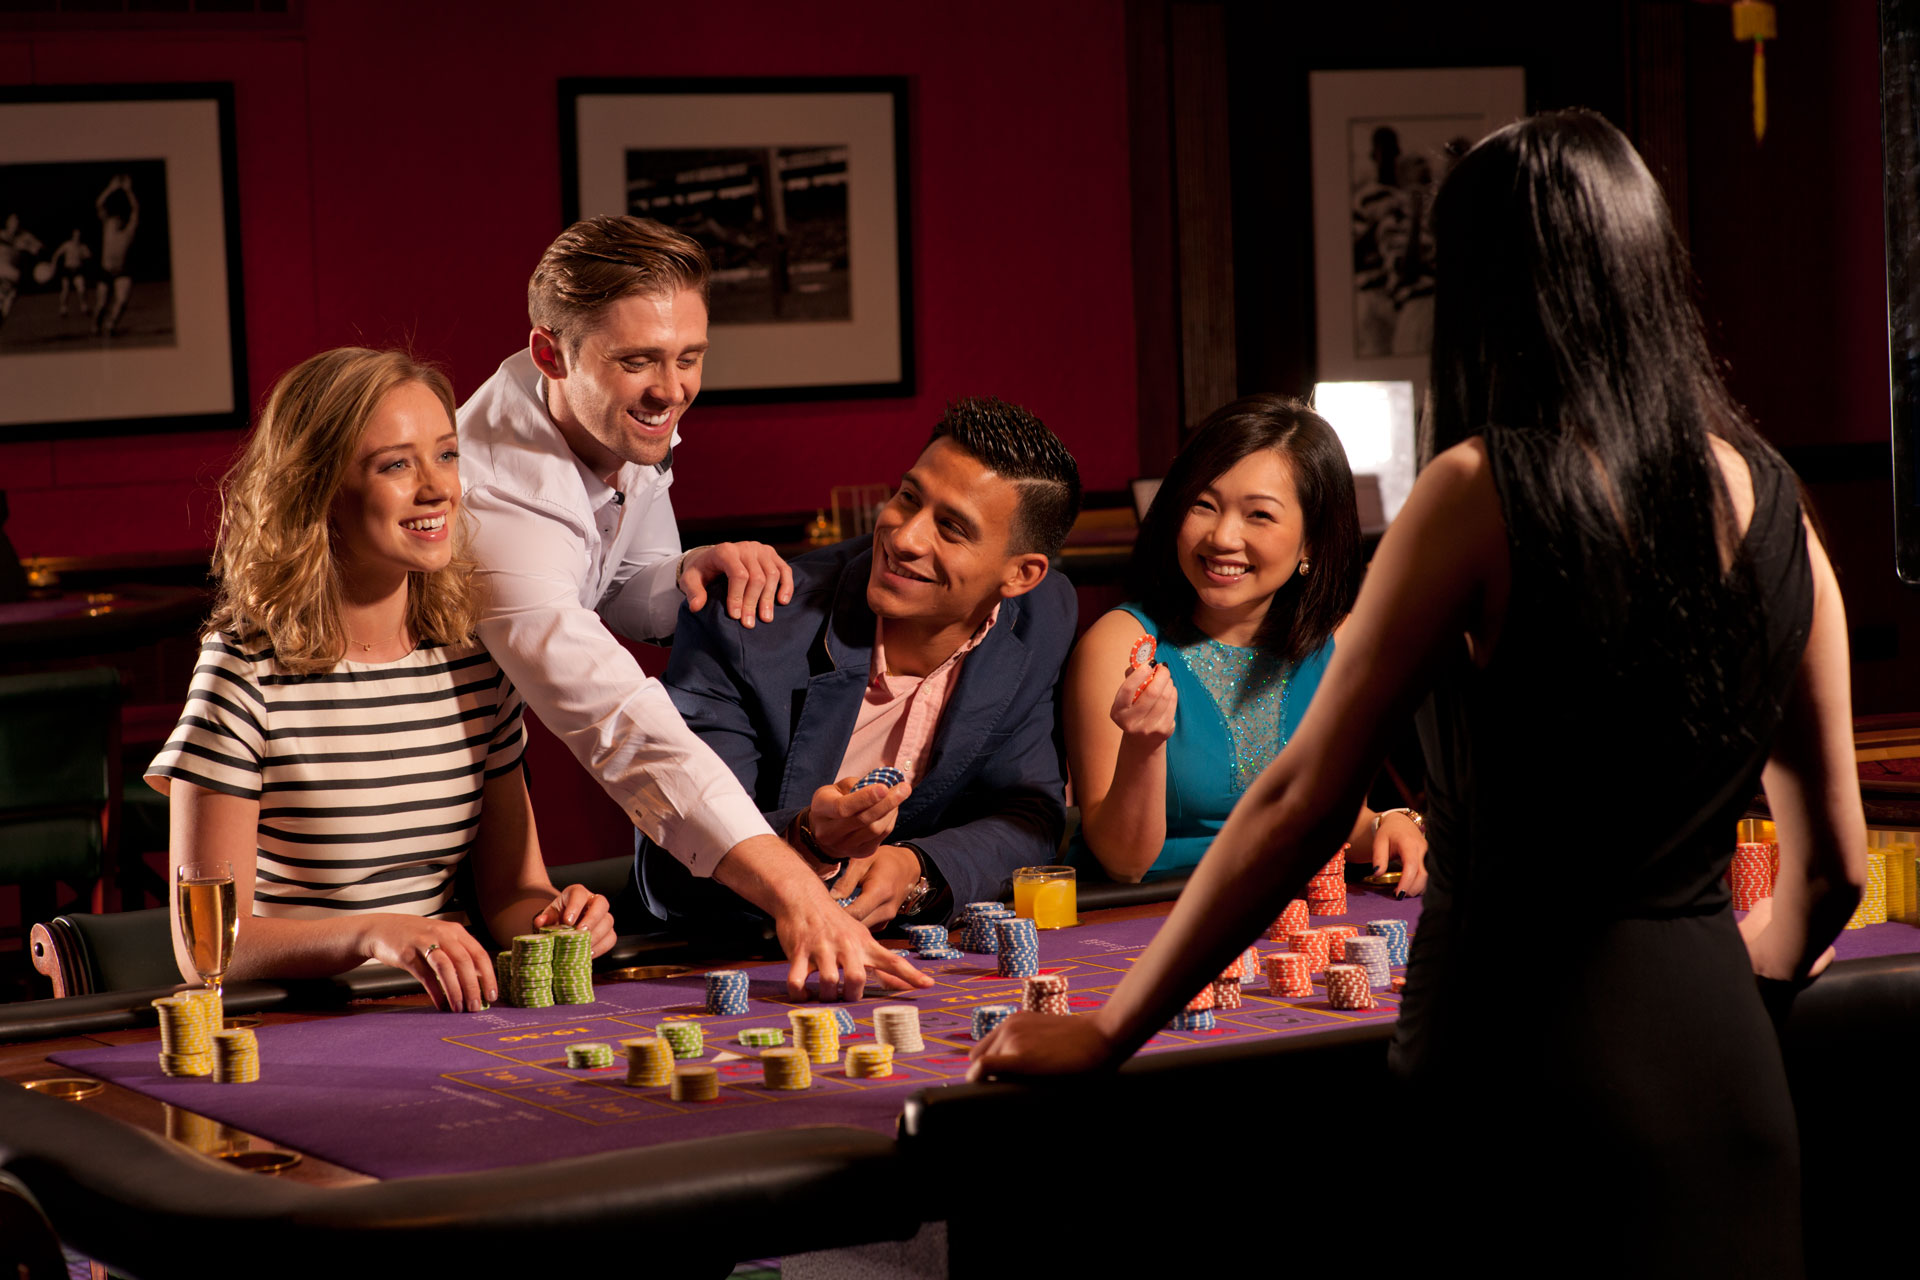 Test your luck of gambling by playing online slots